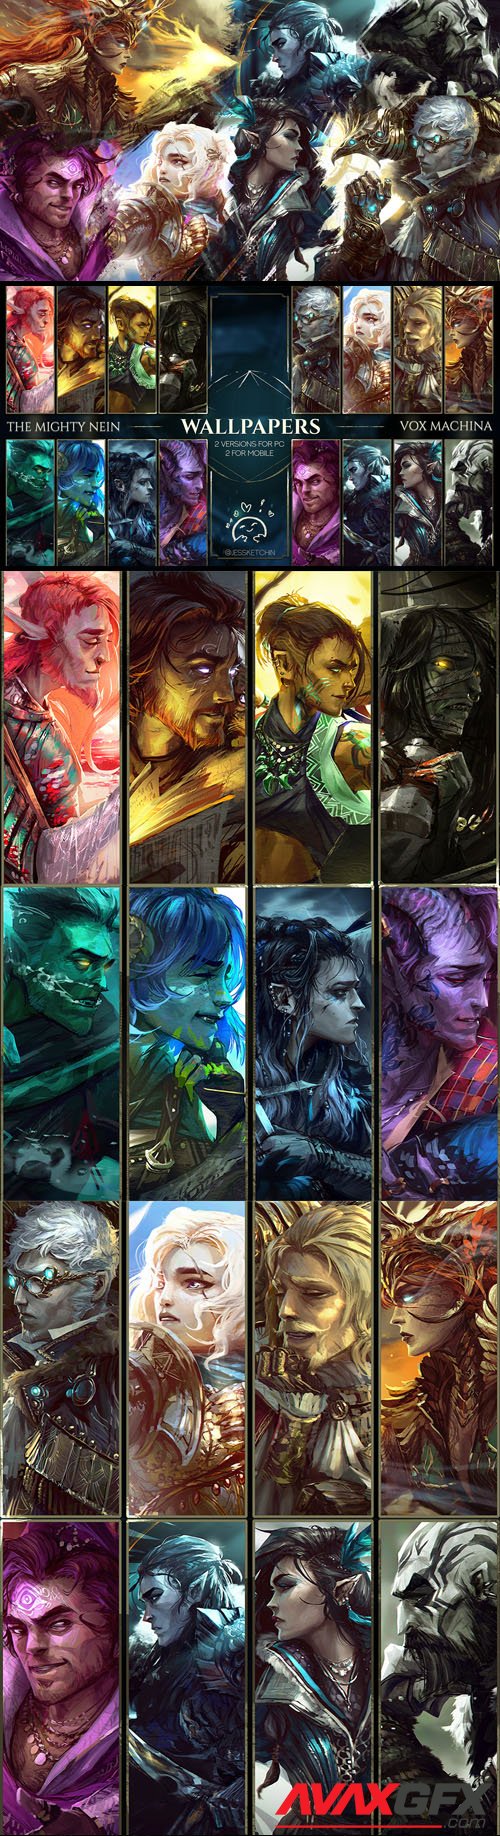 The Mighty Nein & Vox Machina - Mega Wallpaper Pack (PC/Mobile)